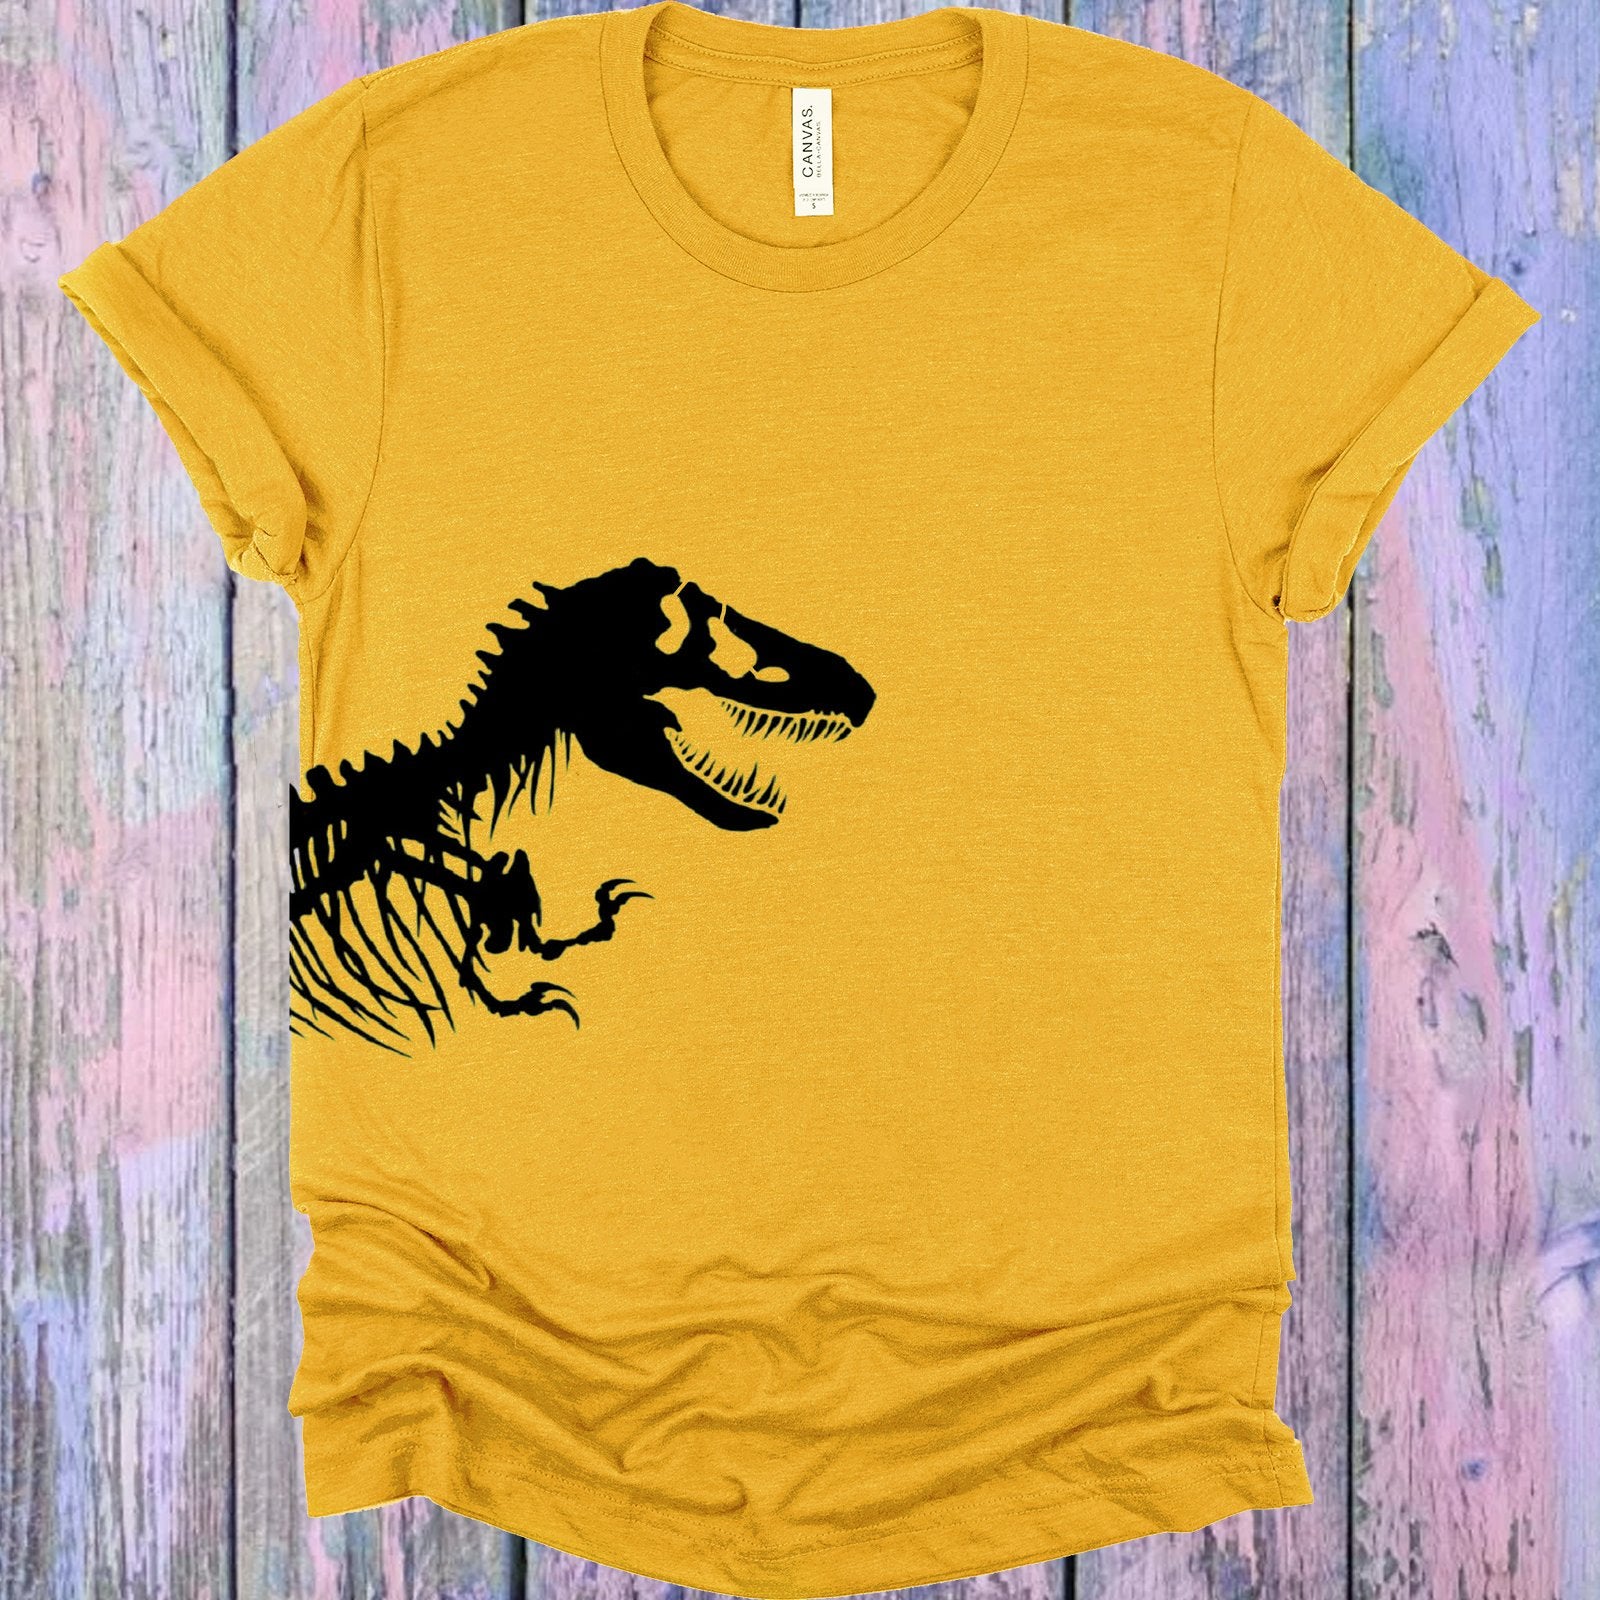 T-Rex Graphic Tee Graphic Tee